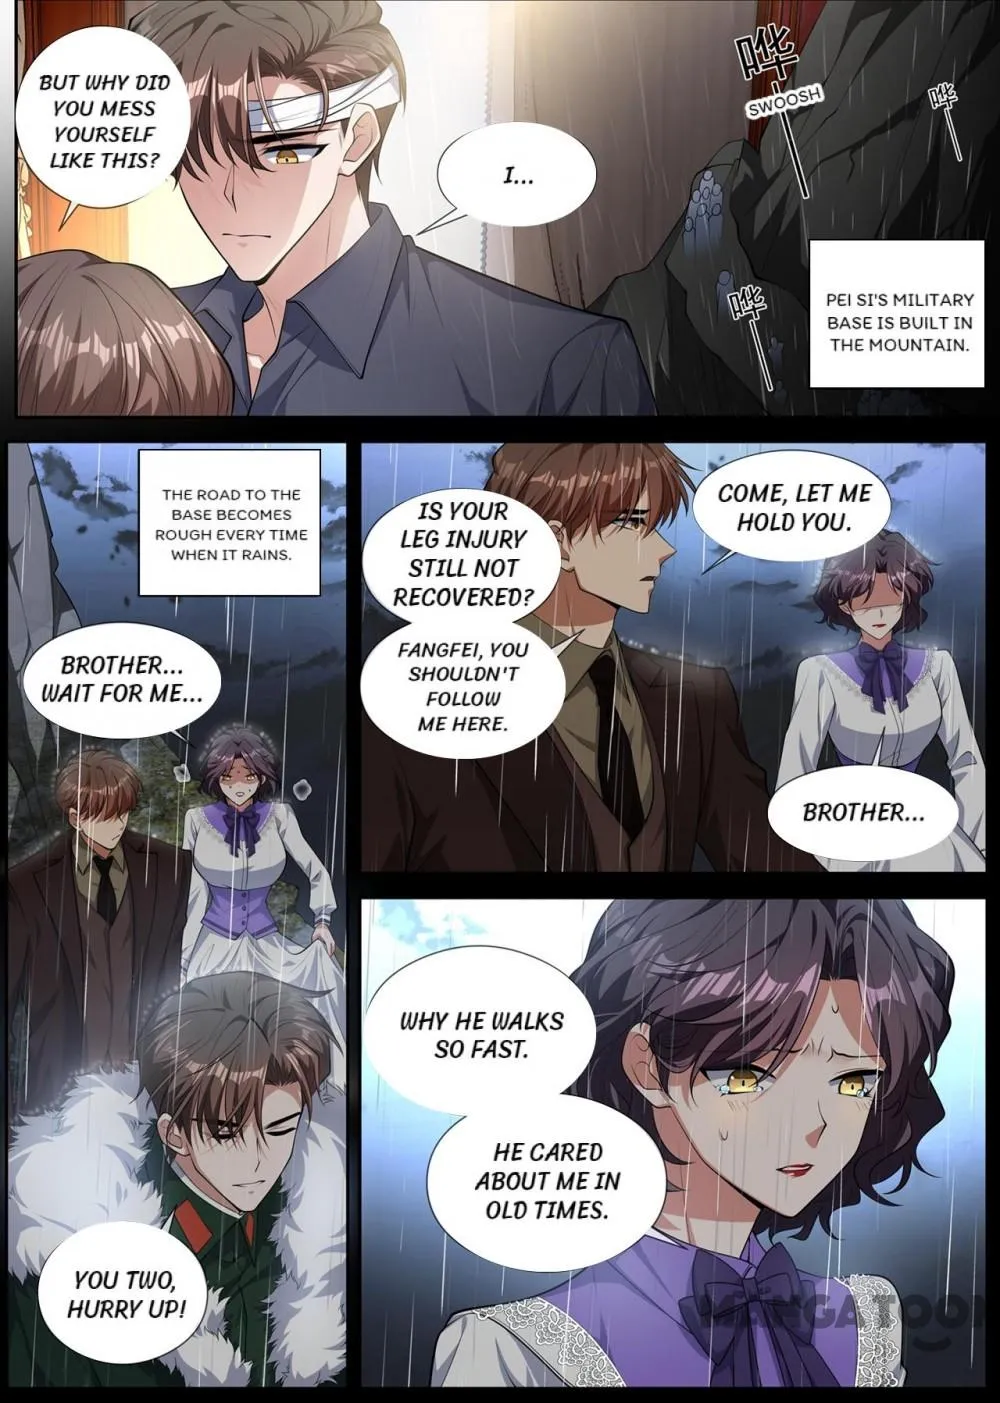 The Epic Revenge ( Marshal Your Wife Run Away ) Chapter 411 - Page 3